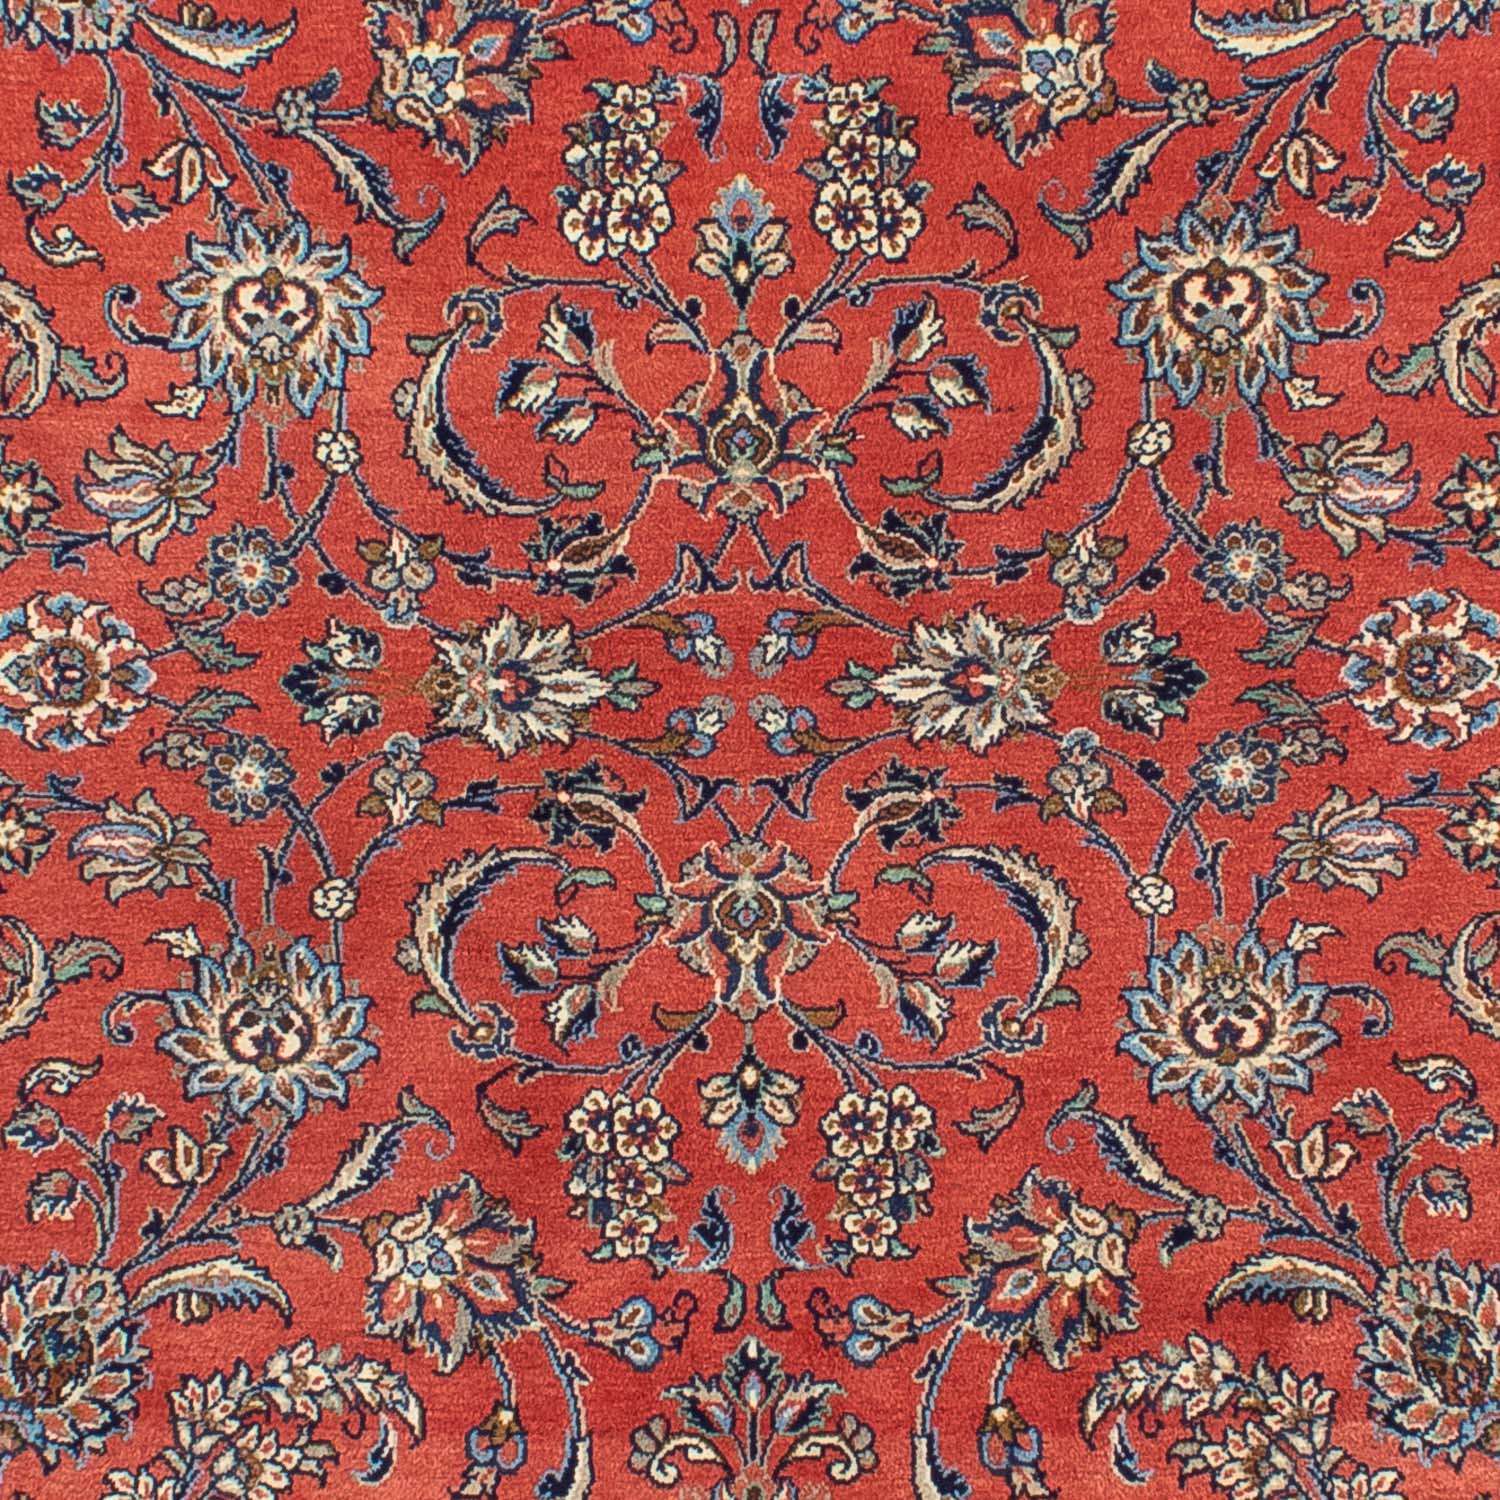 Perser Rug - Classic - 300 x 208 cm - red